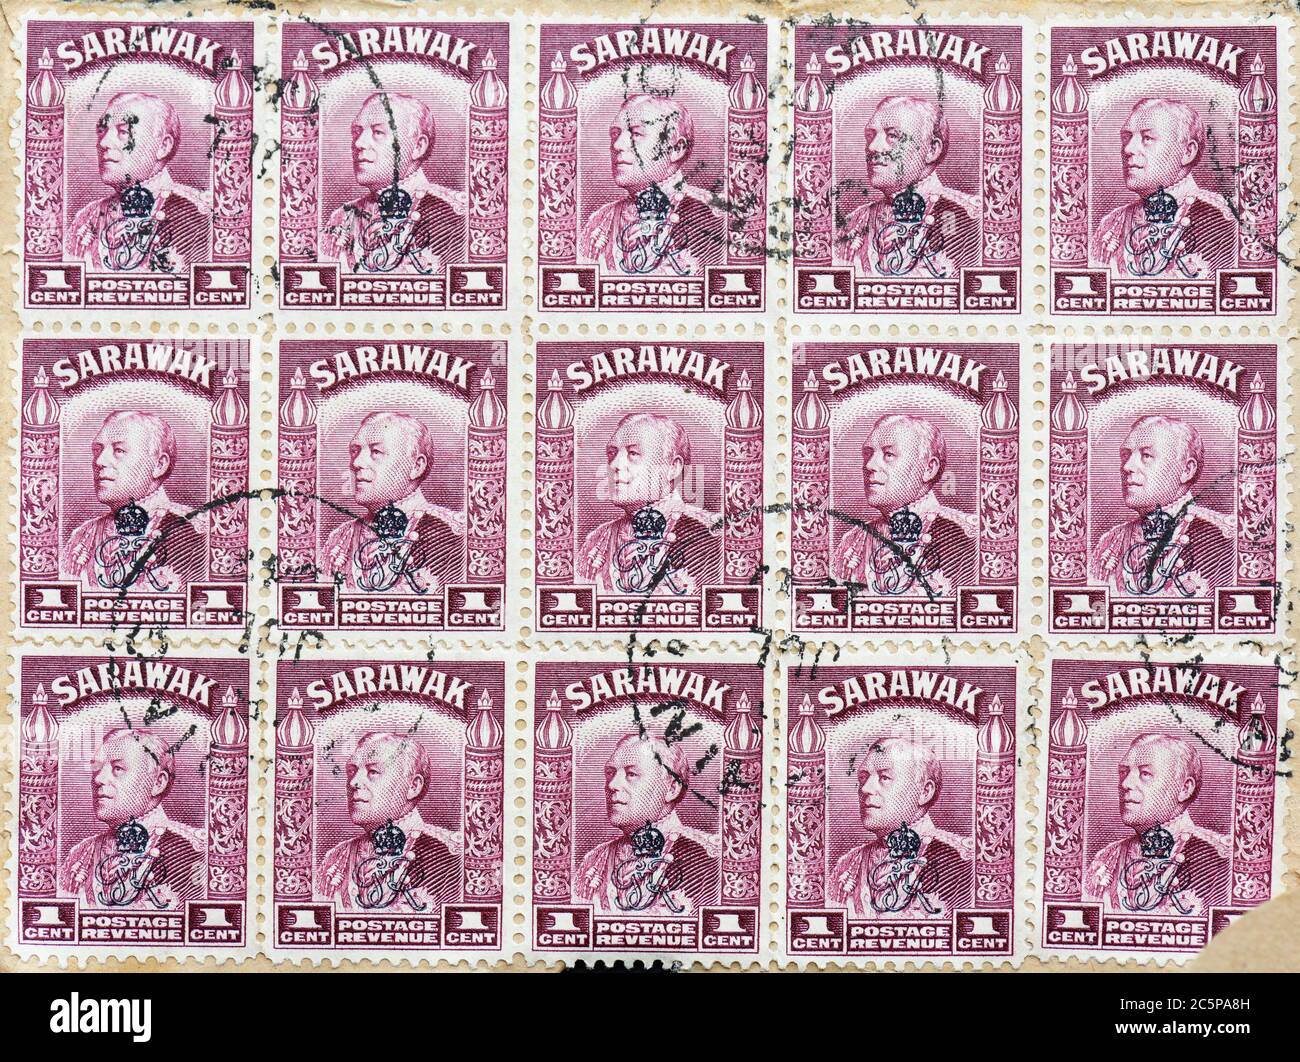 Sarawak (Malaysia, Borneo) postage stamps issued 1947 with Royal Cypher overprint showing Sir Charles Vyner de Windt Brooke the last rajah of Sarawak Stock Photo